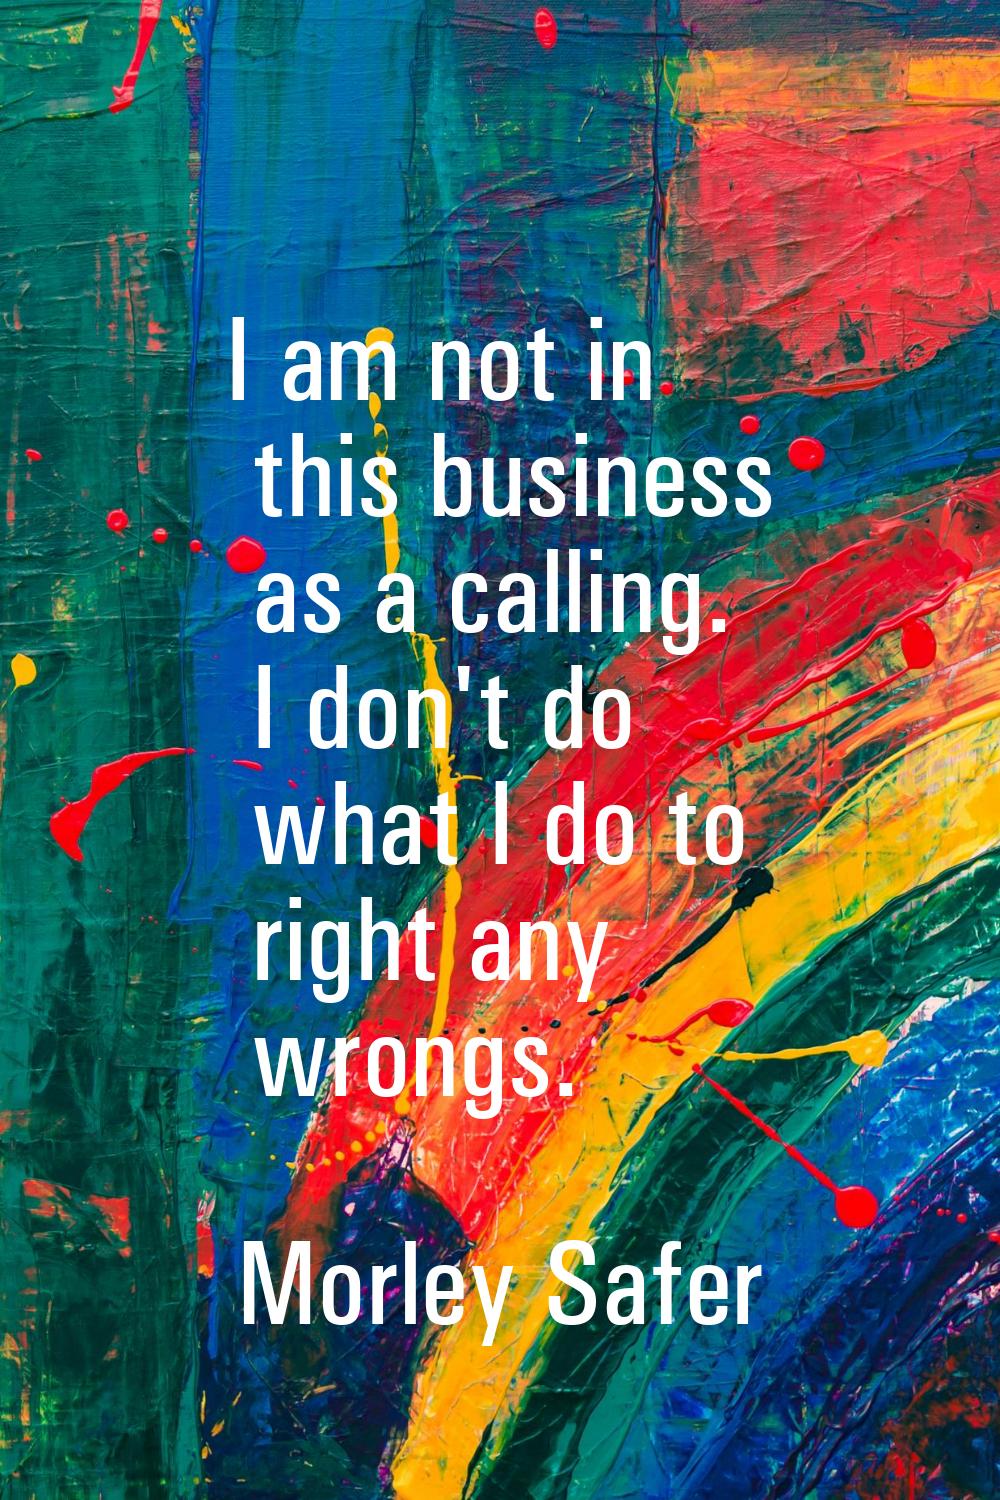 I am not in this business as a calling. I don't do what I do to right any wrongs.